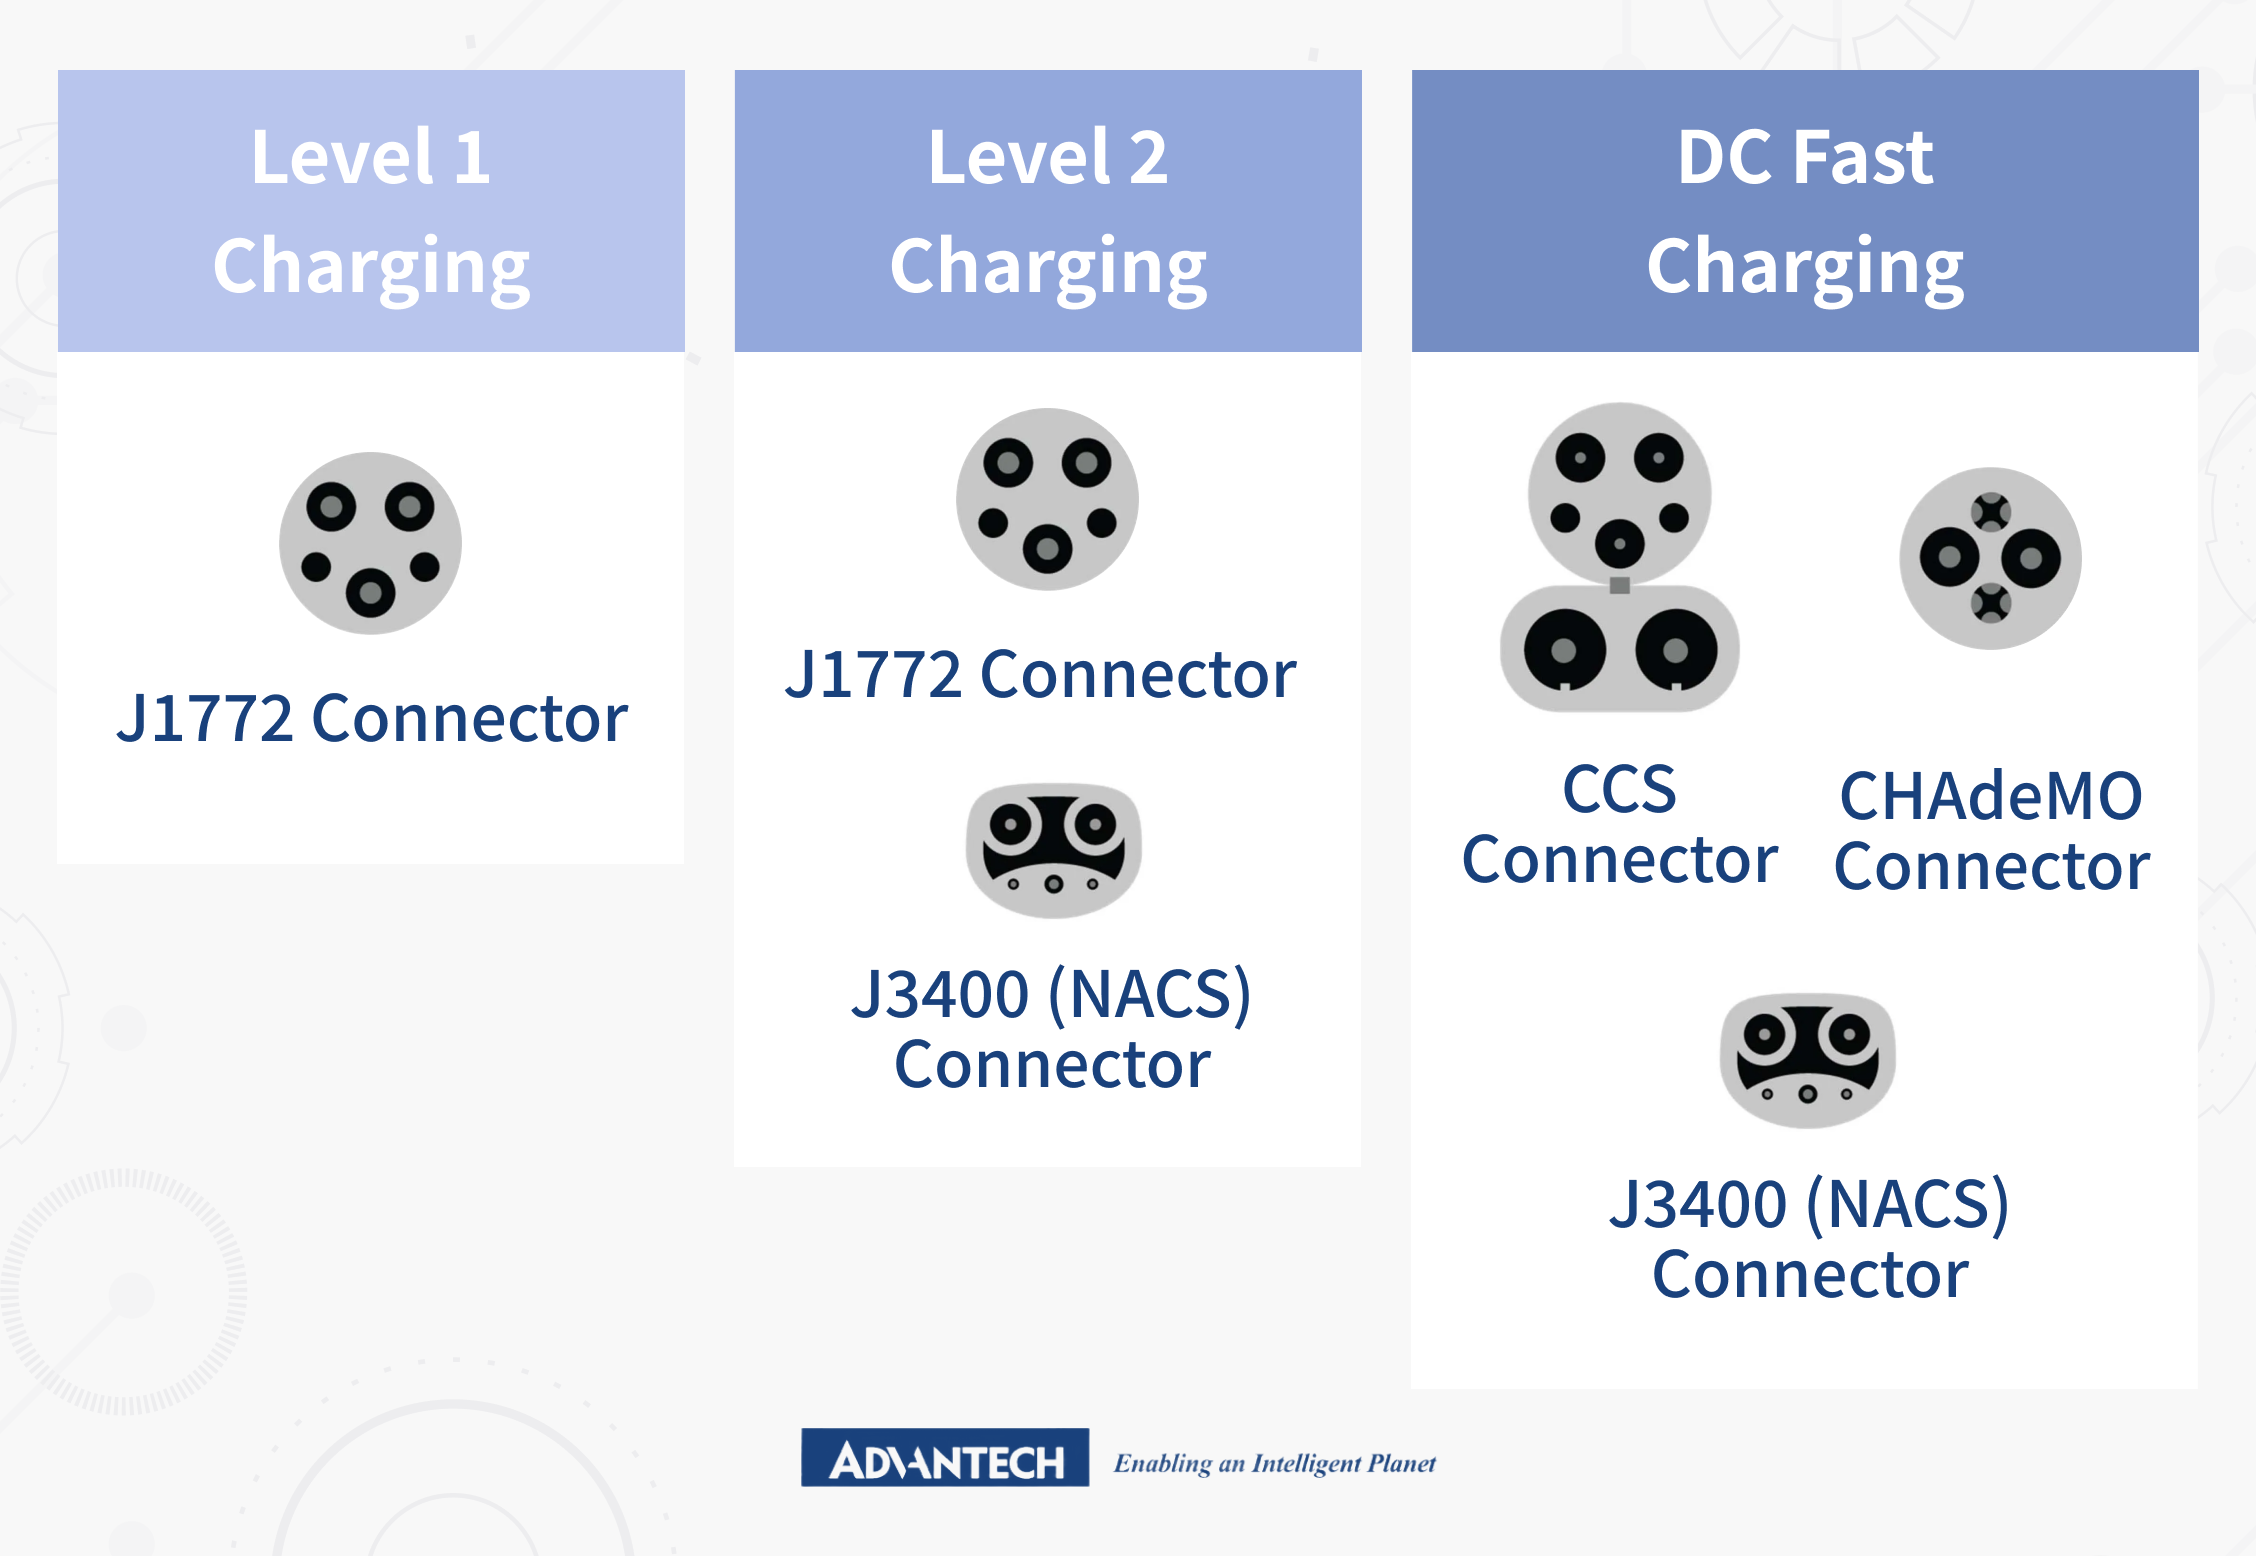 J1772 is common for Level 1 and Level 2 charging, while CCS supports AC and DC fast charging. CHAdeMO is used for DC fast charging, and NACS enables Level 2 and Level 3 charging.